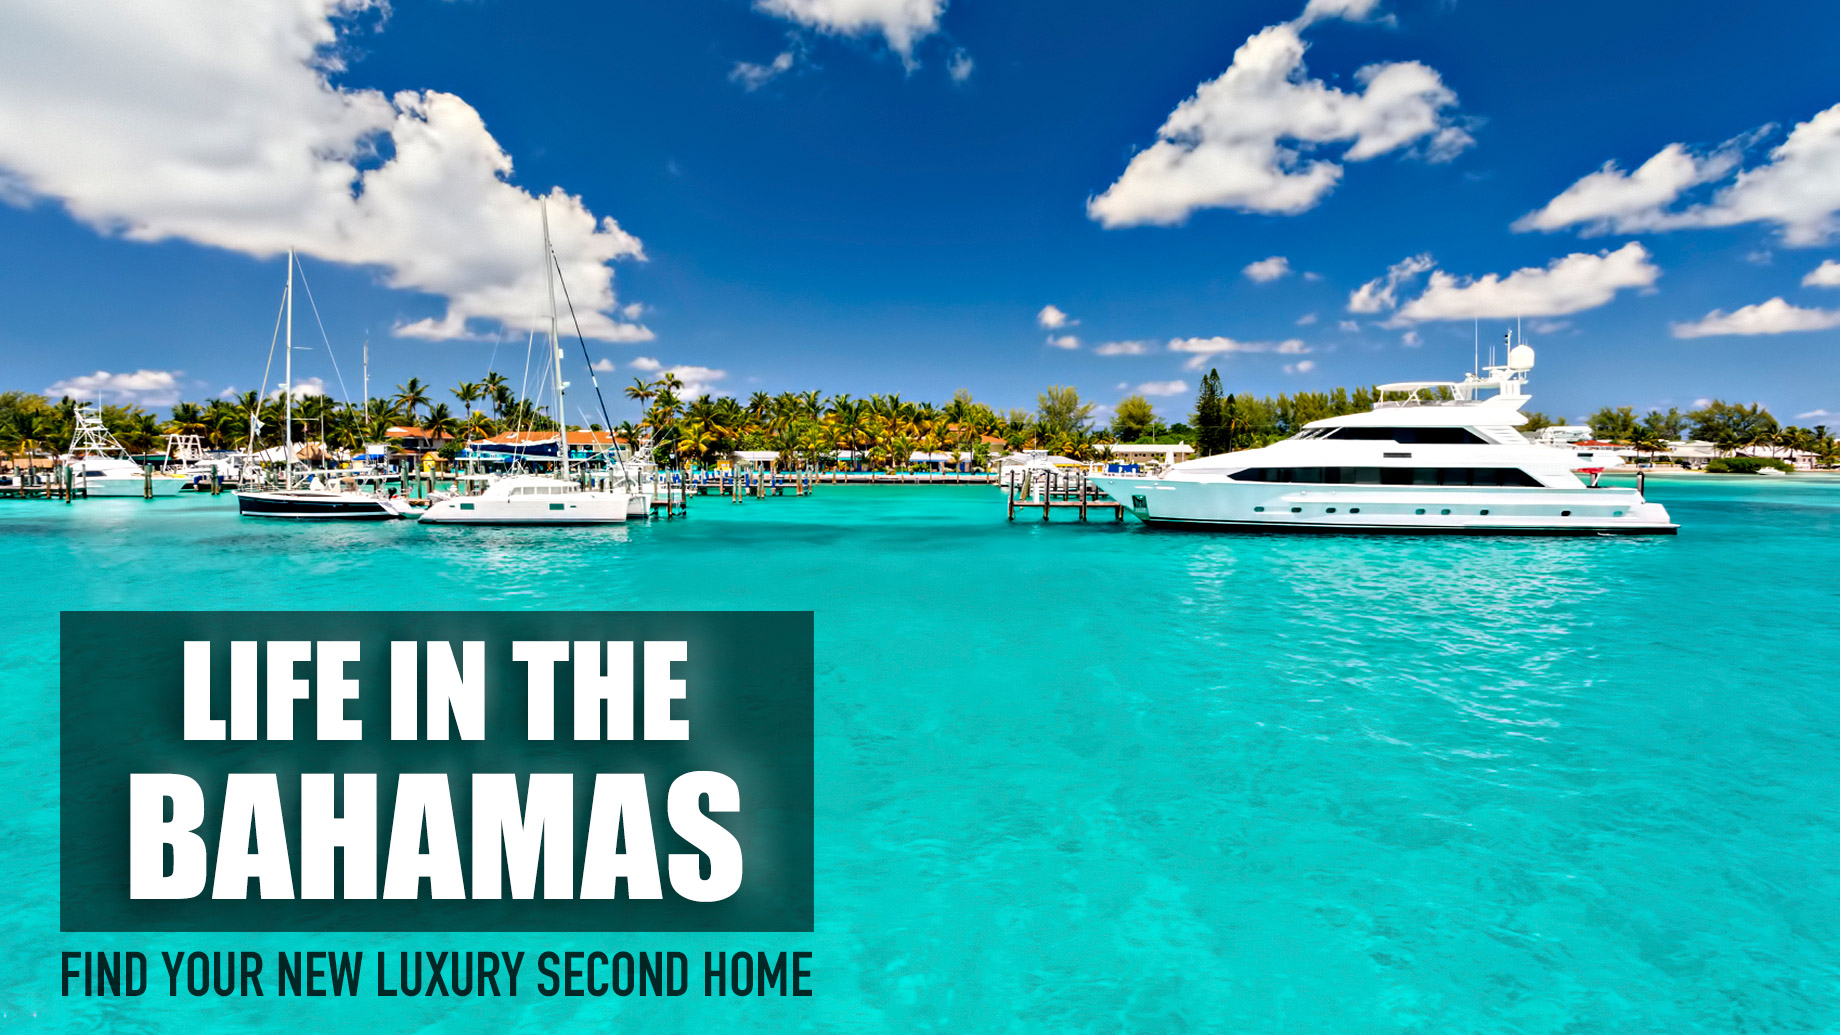 Life in the Bahamas – Find Your New Luxury Second Home